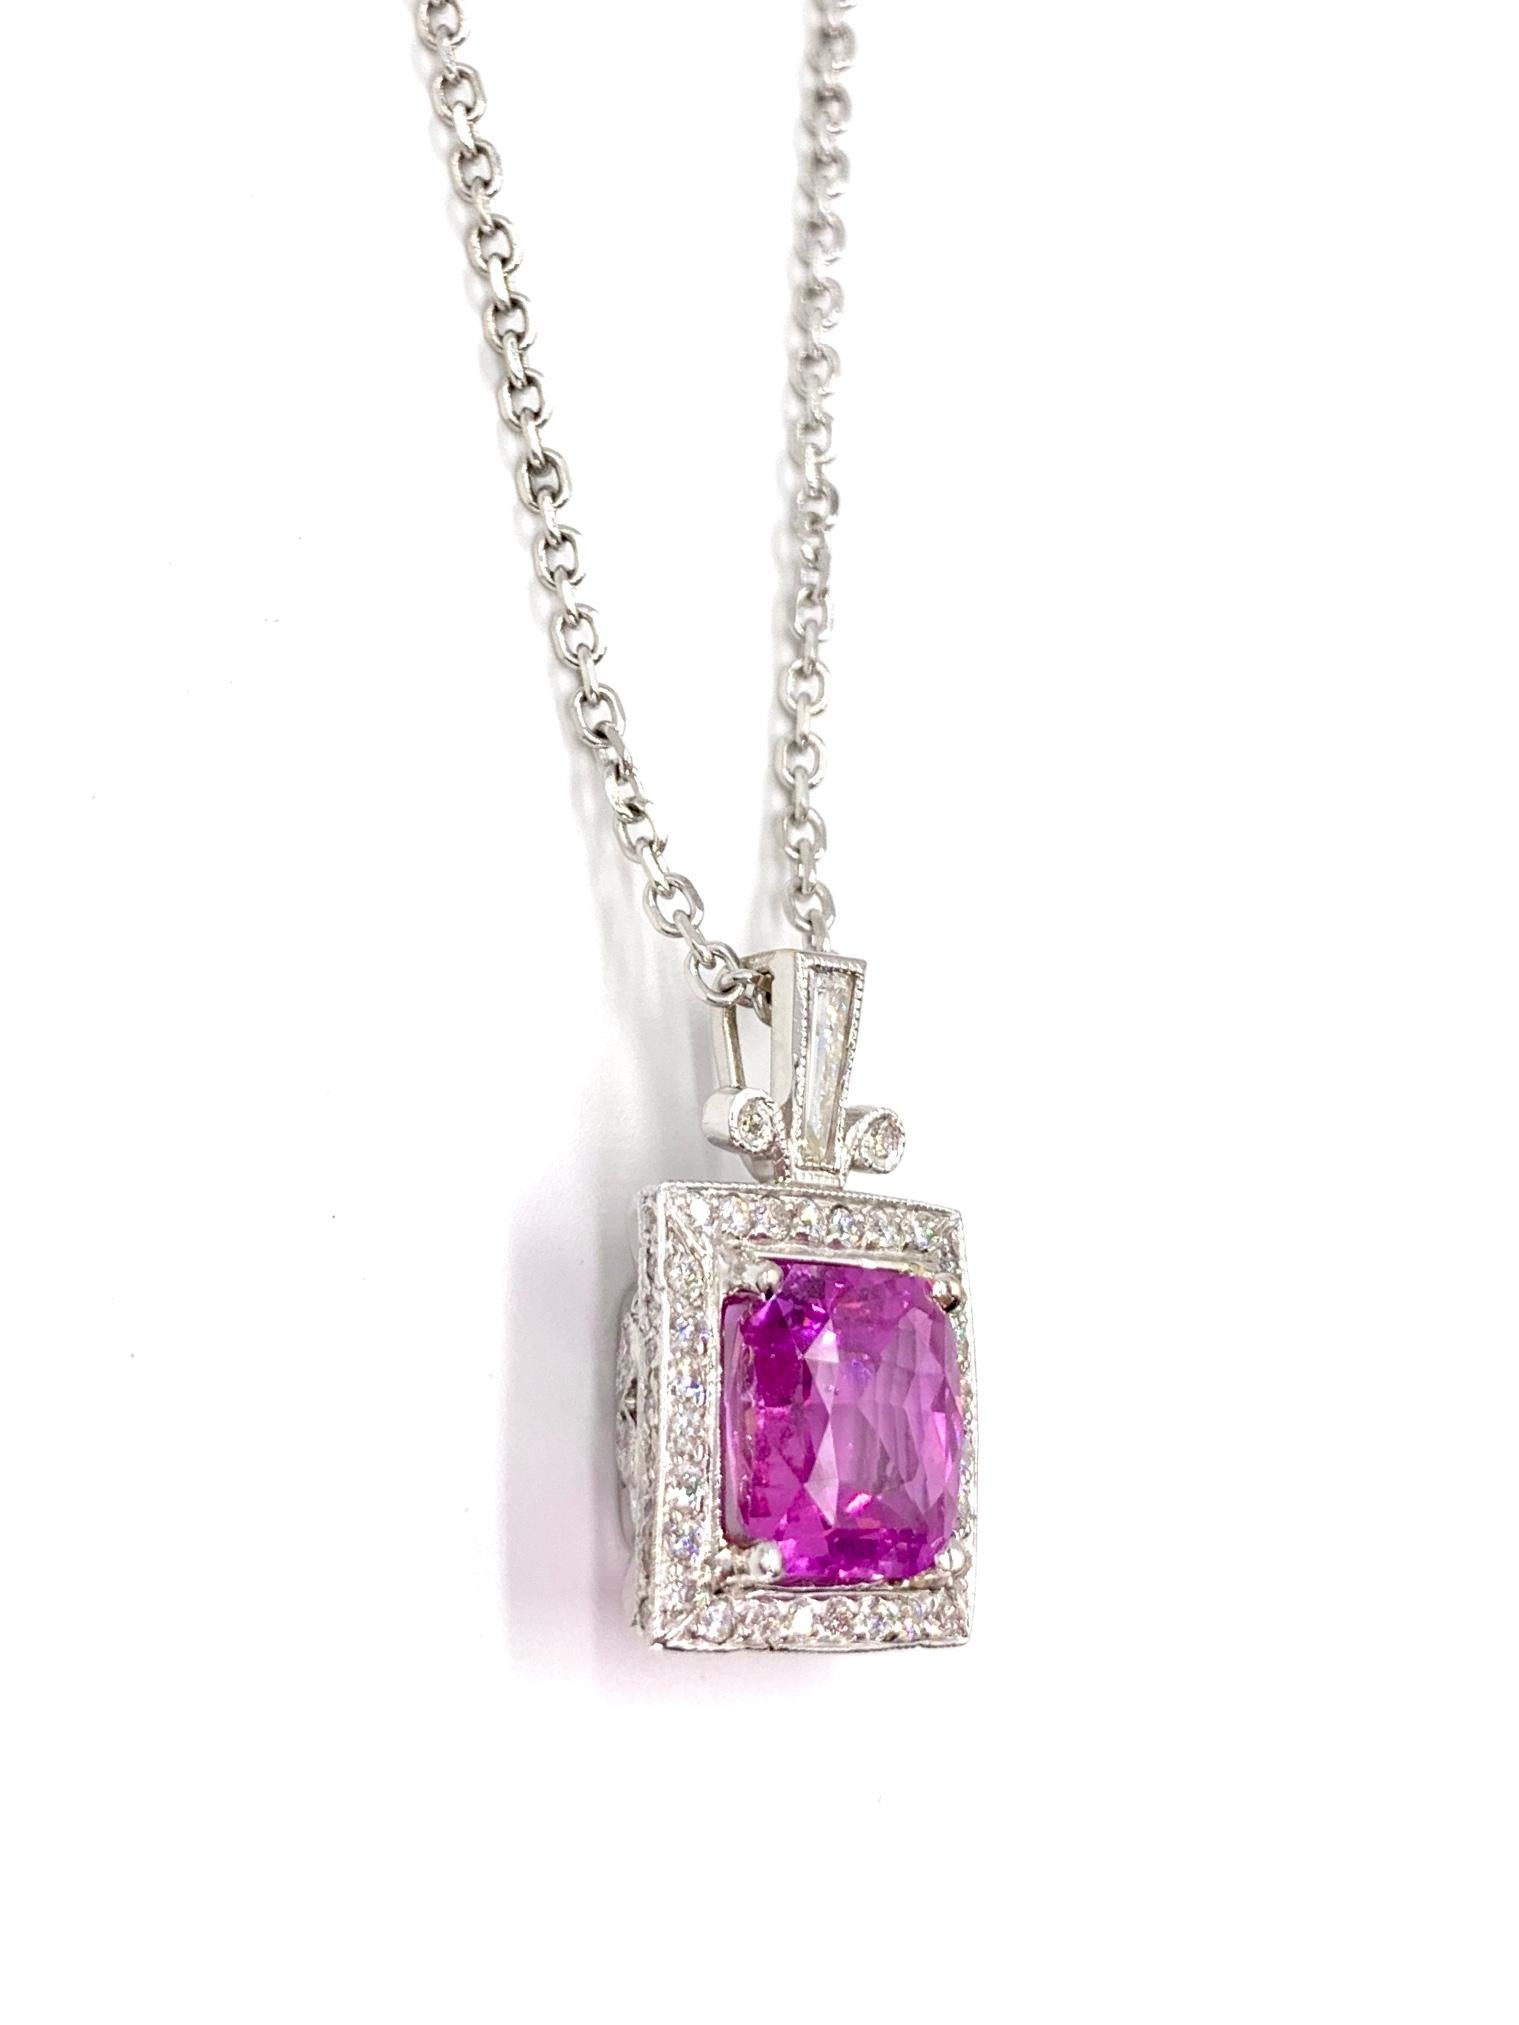 Contemporary 4.74 Carat Pink Sapphire and Diamond Pendant Necklace For Sale